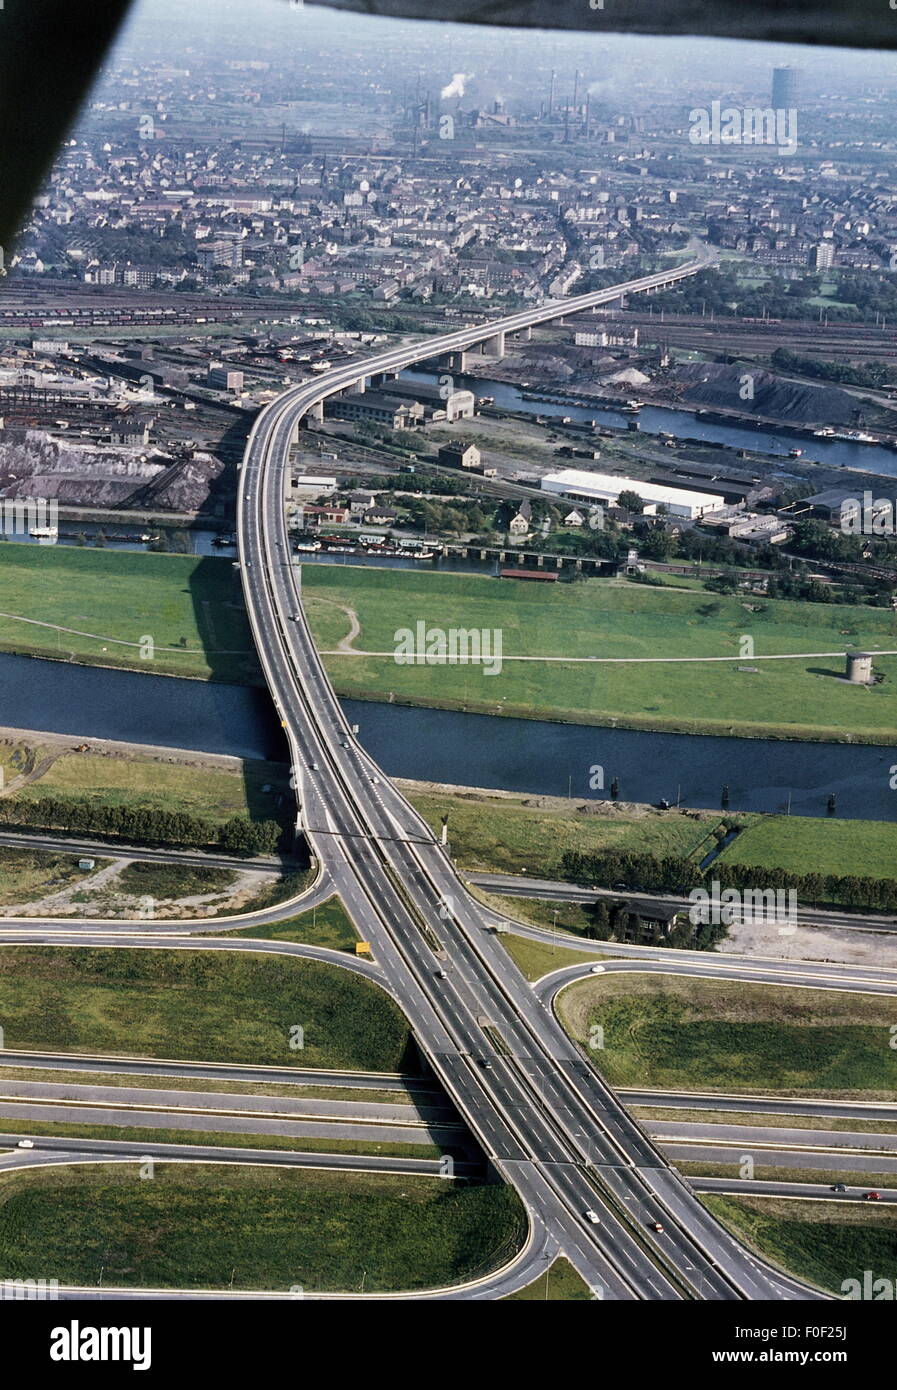 geography / travel,Germany,North Rhine-Westphalia,transport / transportation,of the Ruhrschnellweg from the bird's-eye view,circa 1970,motorway,expressway,motorways,motorway A40,tangent,tangents,main transportation channel,main transportation channels,Ruhr area,Ruhr Valley,motor highway,motor highways,congested urban area,conurbation,agglomeration area,congested urban areas,conurbations,agglomeration areas,road axis,infrastructure,longdistance traffic,arterial road,trunk road,road traffic,volume of traffic,traffic volume,aerial p,Additional-Rights-Clearences-Not Available Stock Photo